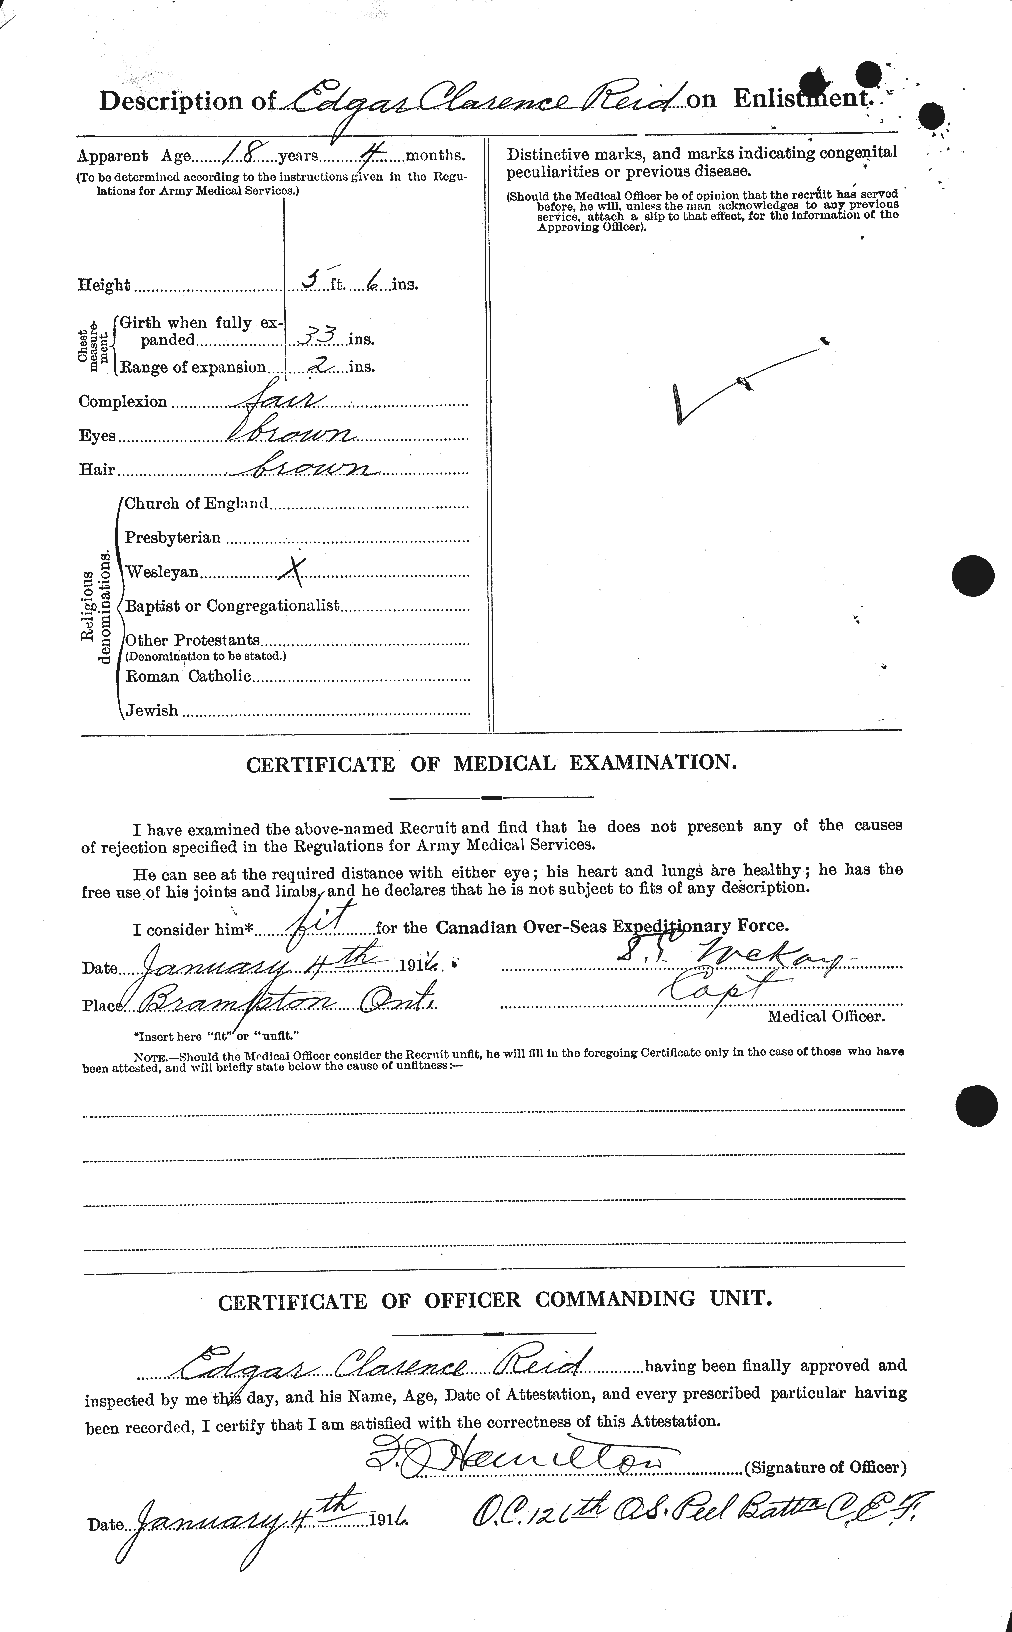 Personnel Records of the First World War - CEF 597977b